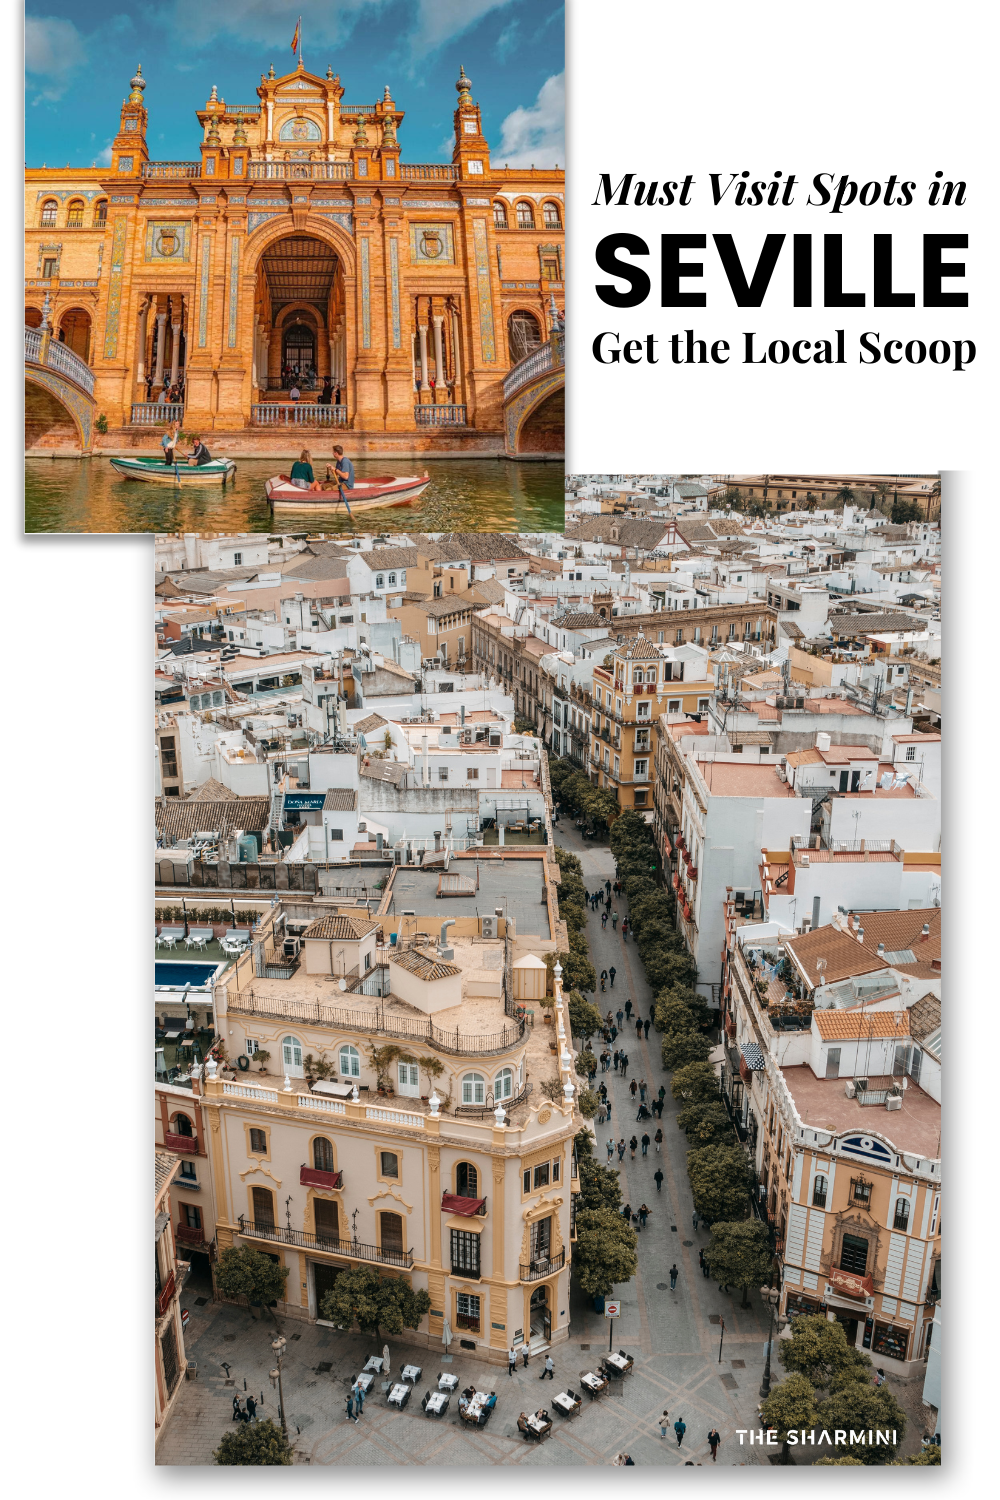 Is Seville safe for solo female travellers?